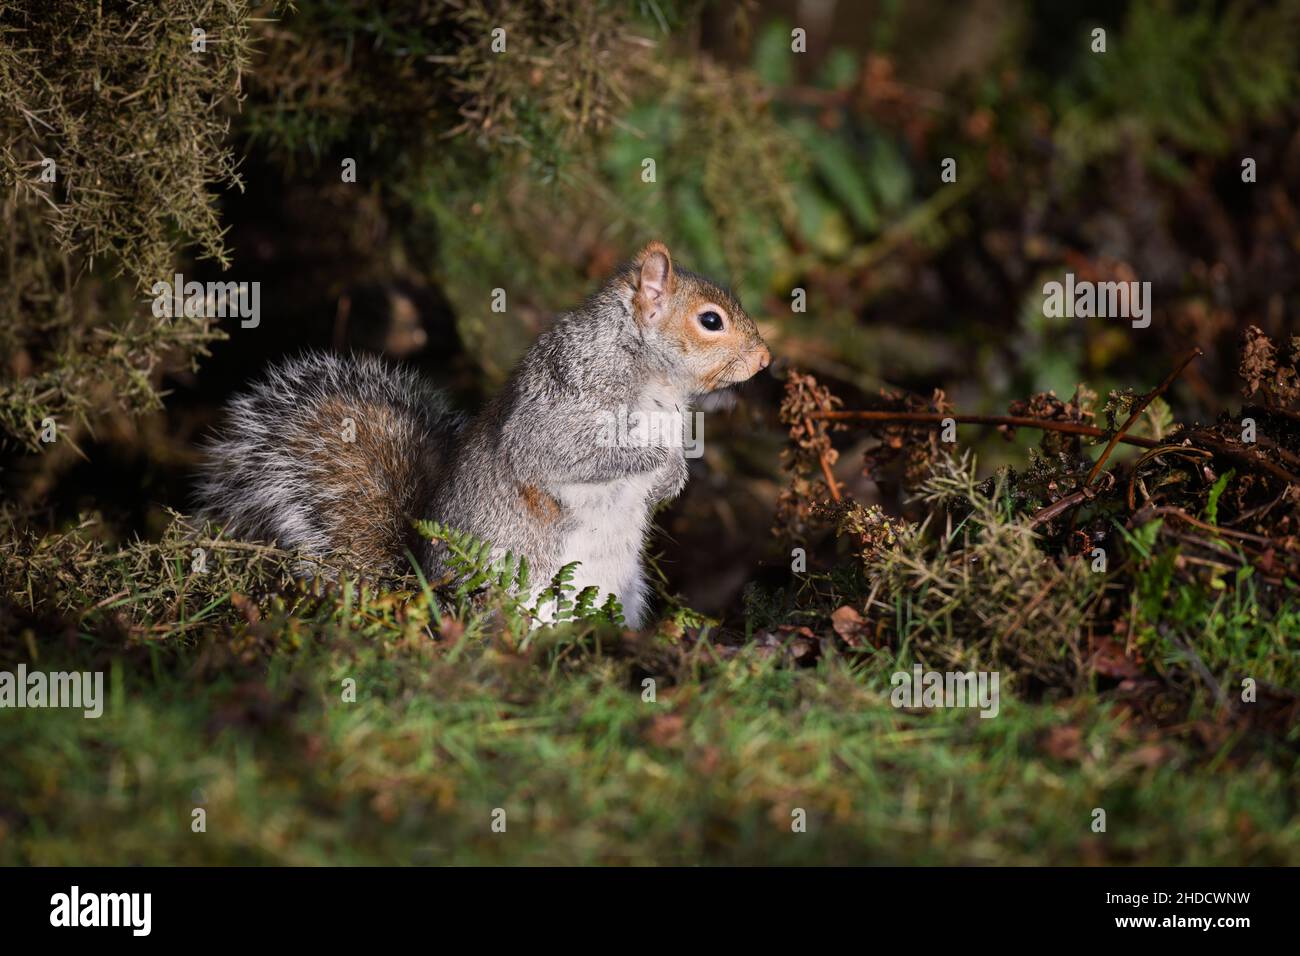 side on profile portrait of a grey squirrel as it is standing on the ground surrounded by the undergrowth Stock Photo